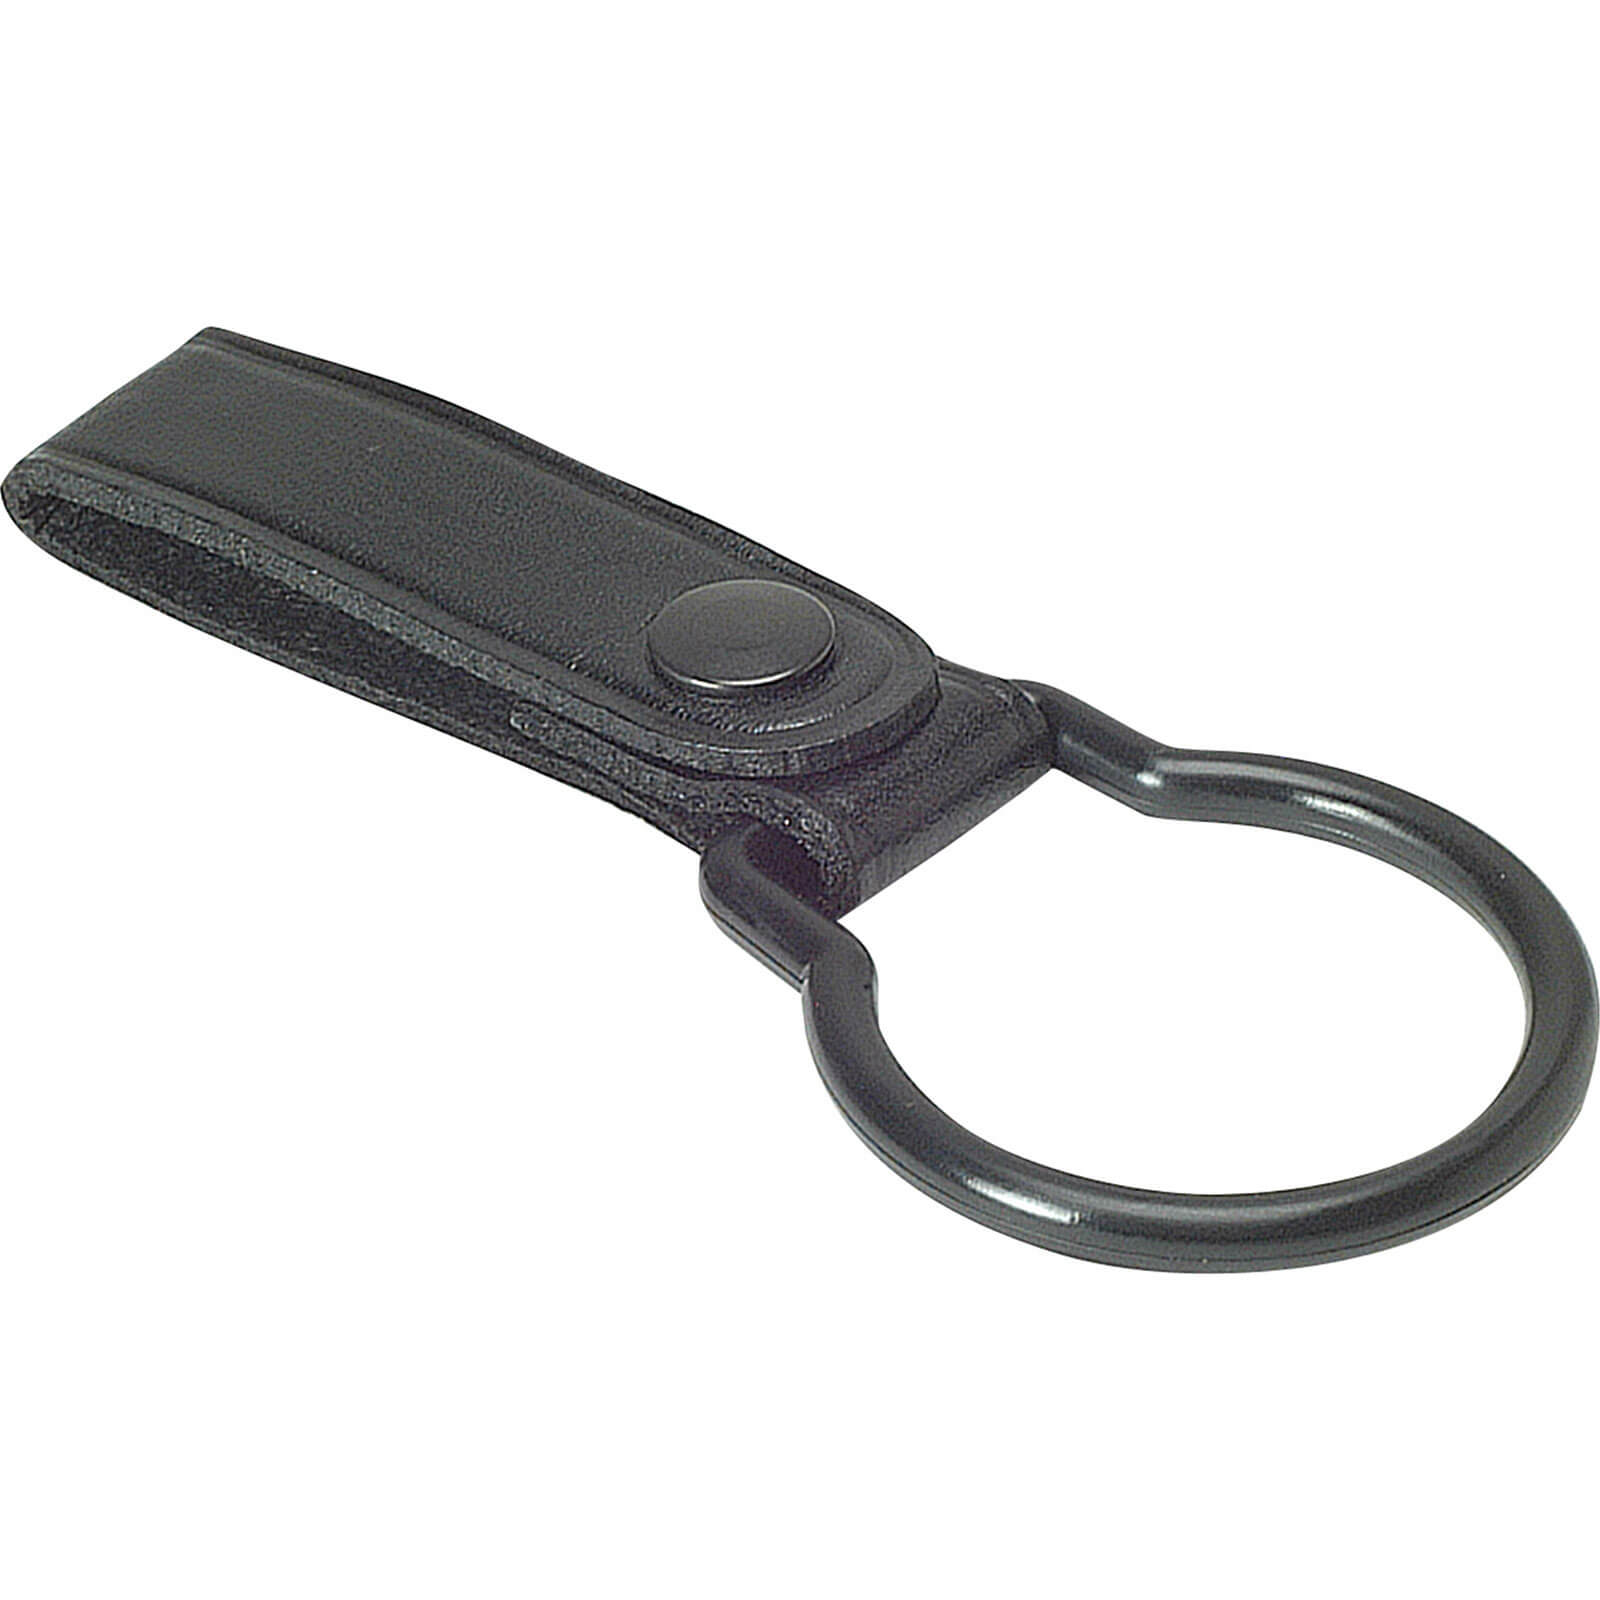 Photo of Maglite Leather Belt Loop Holder For D Cell Torches